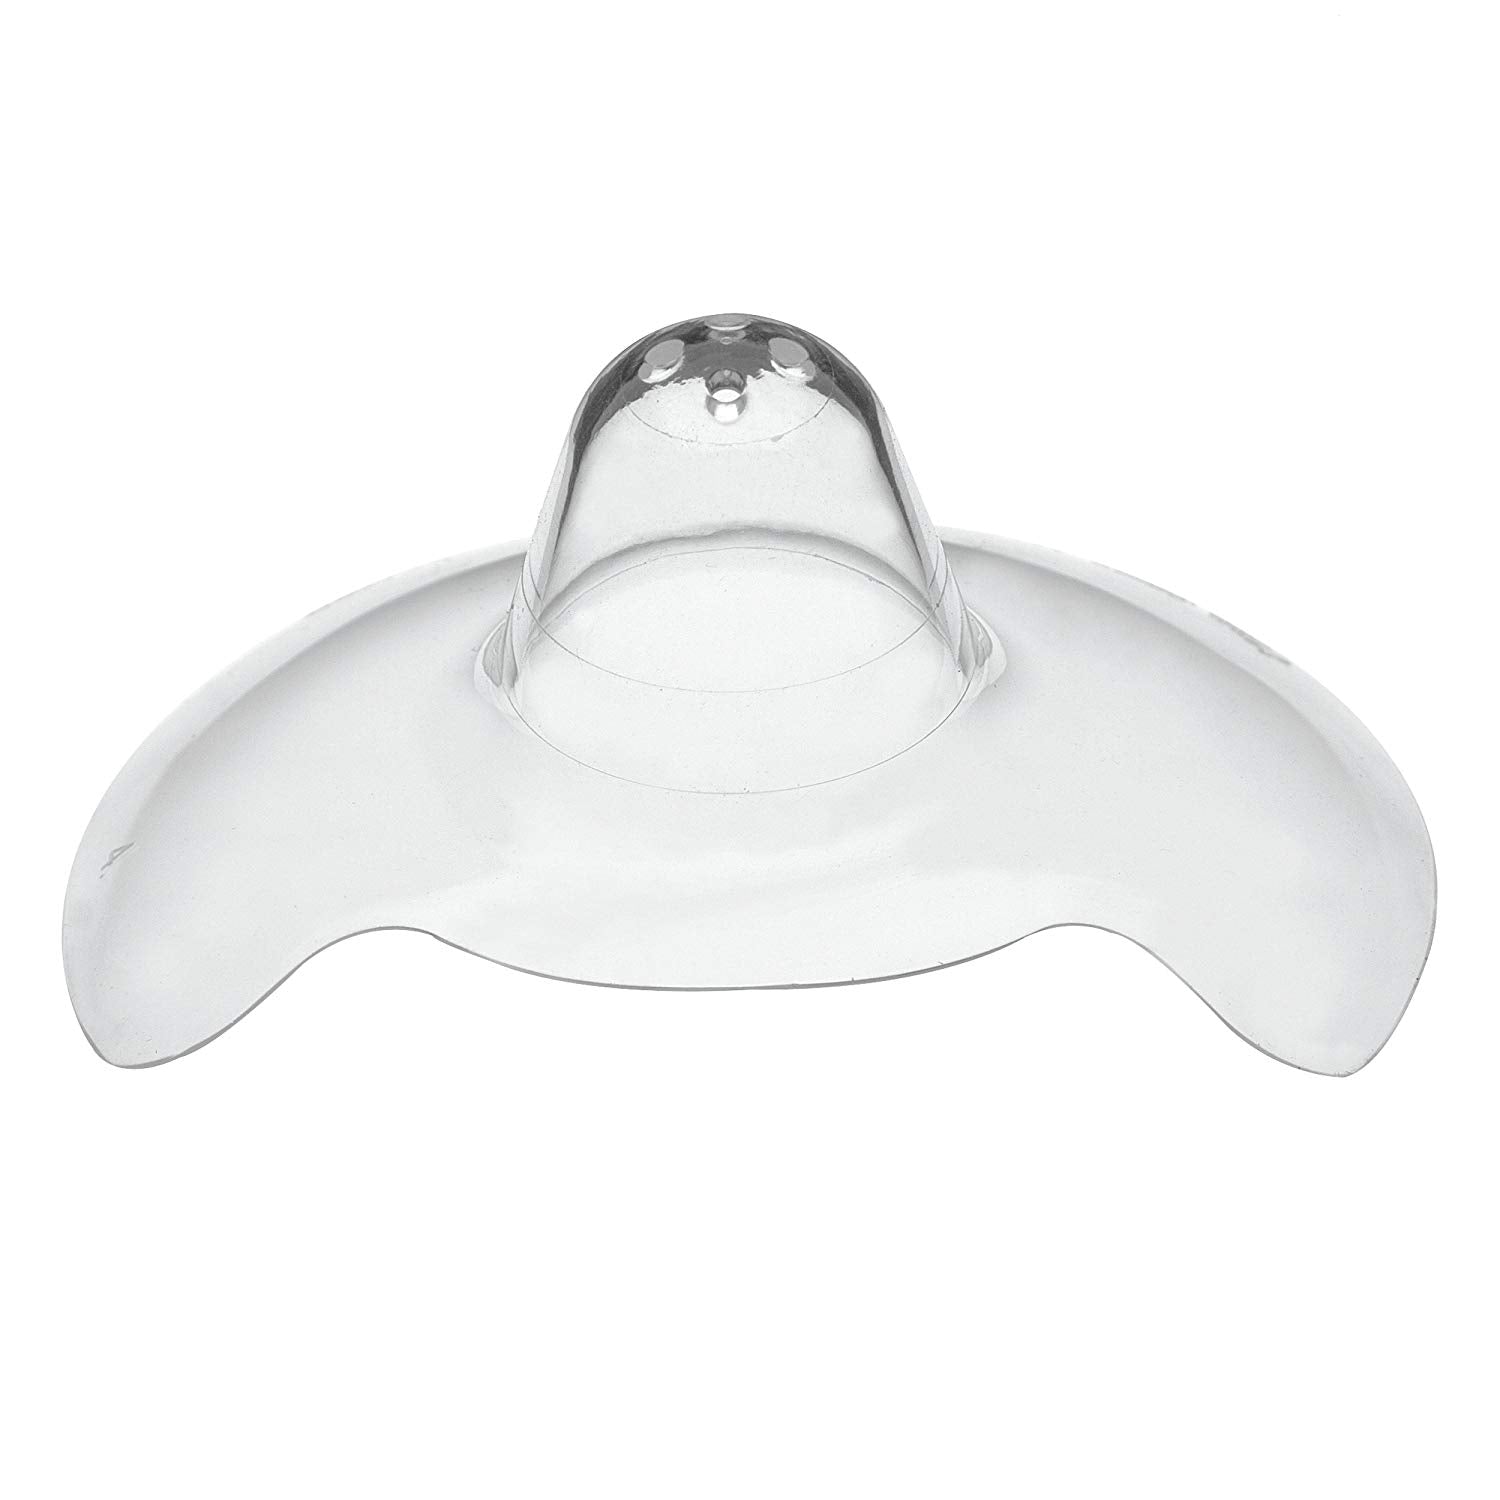 Contact Nipple Shield with Case